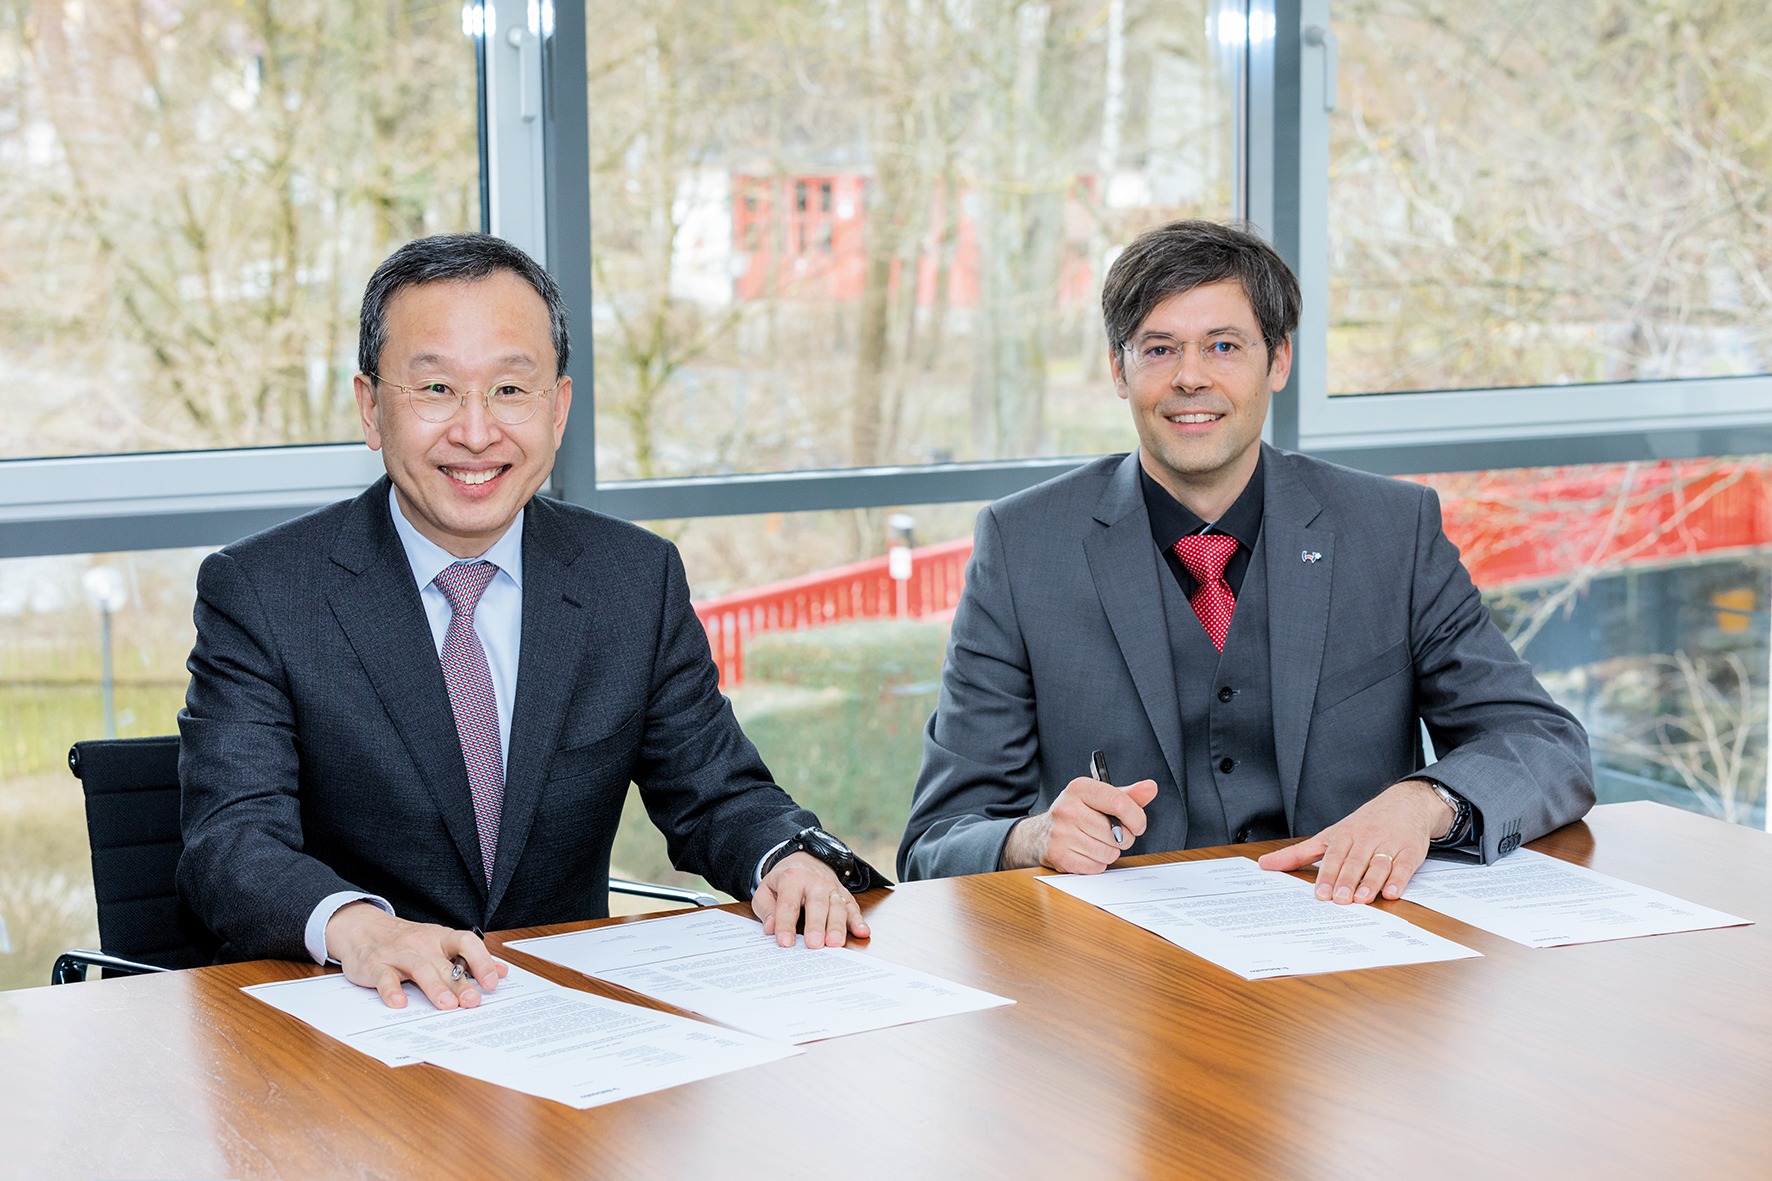 Unterzeichnung des Letter of Intent: Ph. D. Seh-Woong (S.W.) Jeong, Executive Vice President Samsung SDI (links) und Dr. Hartung Wilstermann, Executive Vice President E-Solutions & Services bei Webasto (rechts) - (© Webasto Group